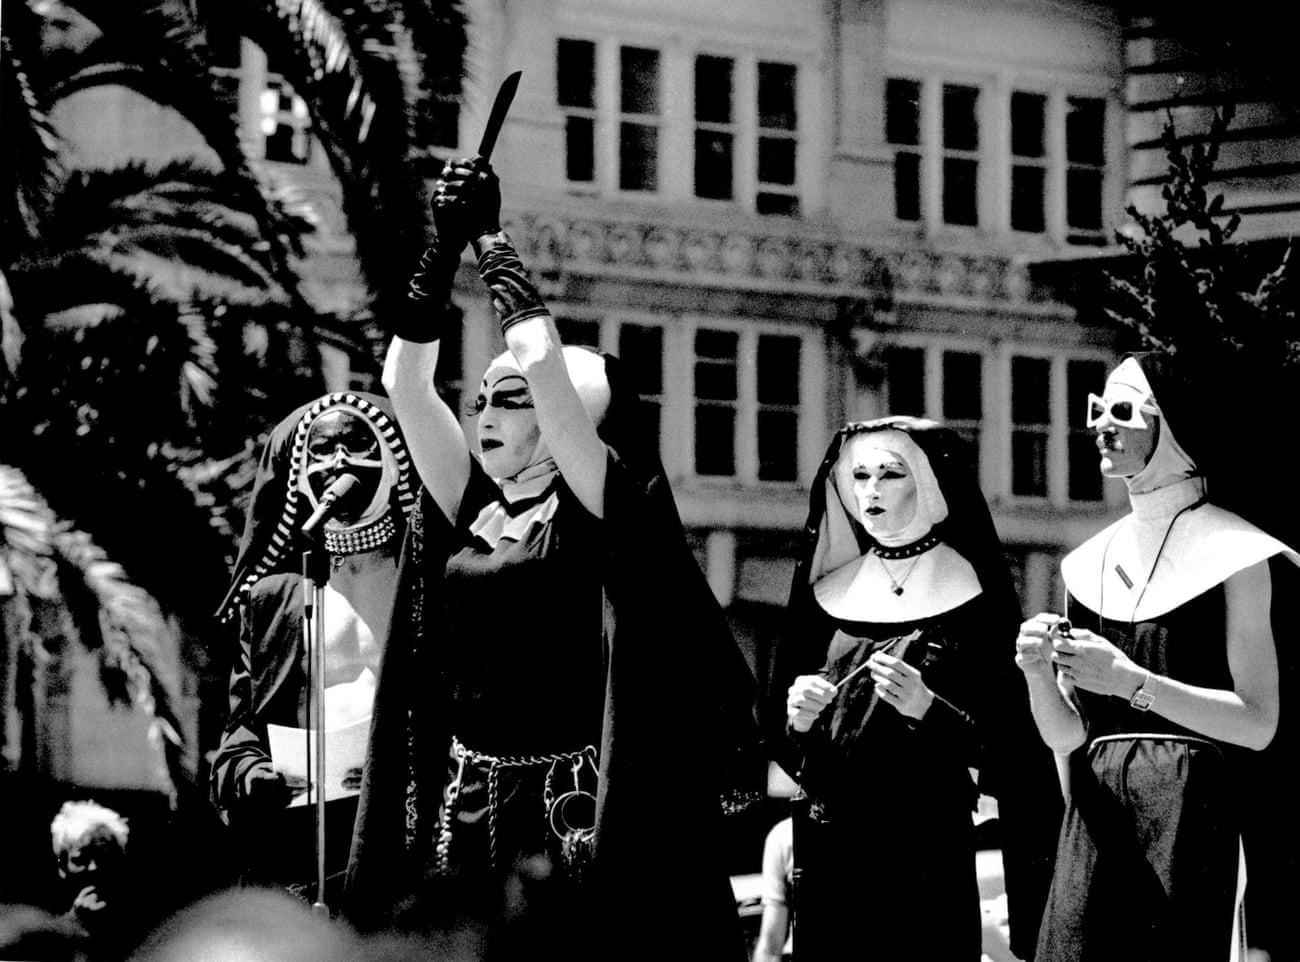 The San Francisco-based Sisters of Perpetual Indulgence, an order of queer and transgender nuns, have ministered for more than 40 years.